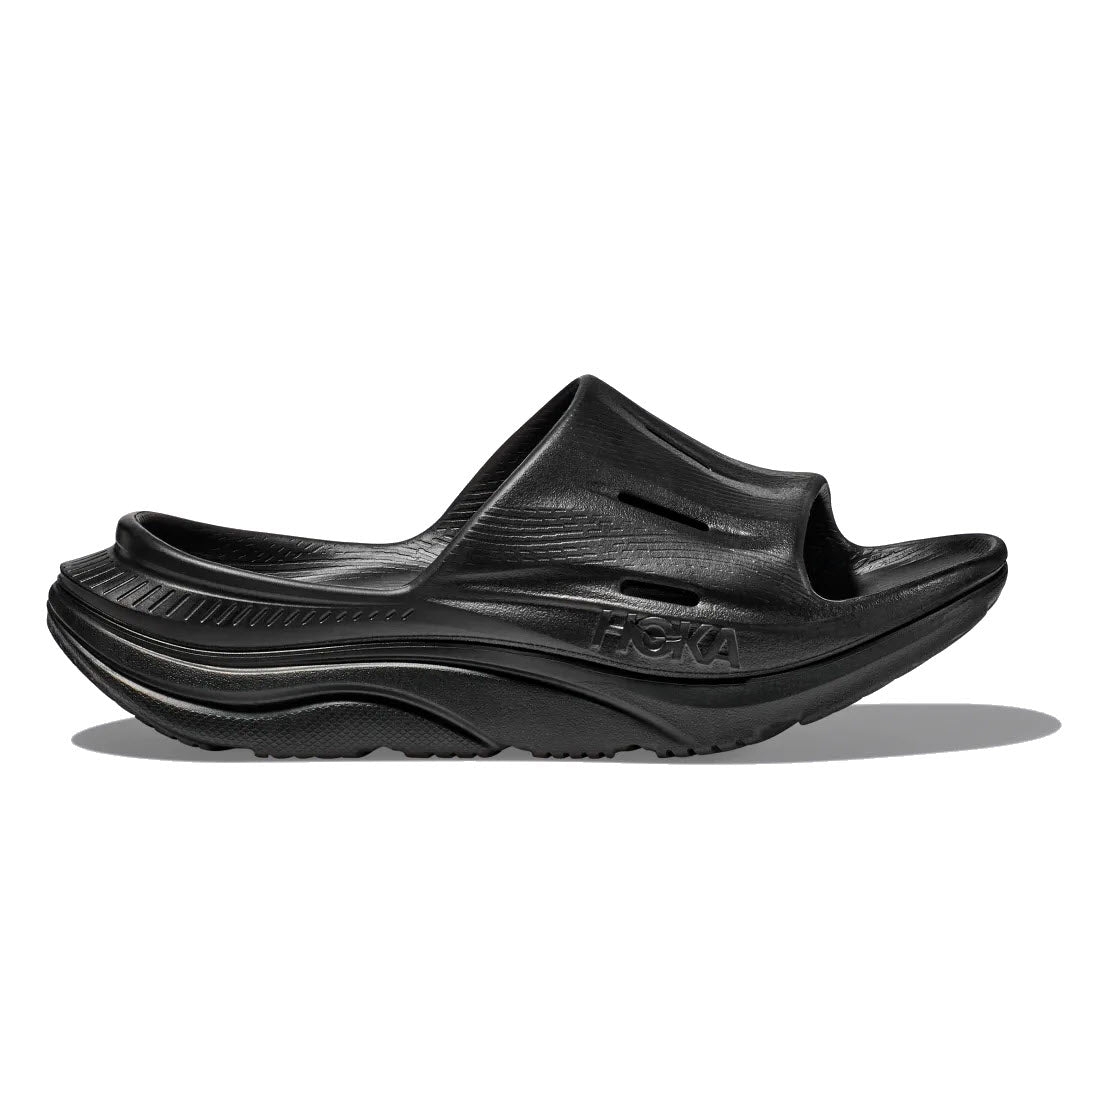 A HOKA ORA RECOVERY SLIDE 3 BLACK - ADULT, cushioned slip-on sandal with a thick, textured sole and open toe design. The brand name &quot;Hoka&quot; is embossed on the side, highlighting its comfort-driven style and foot-cradling comfort.